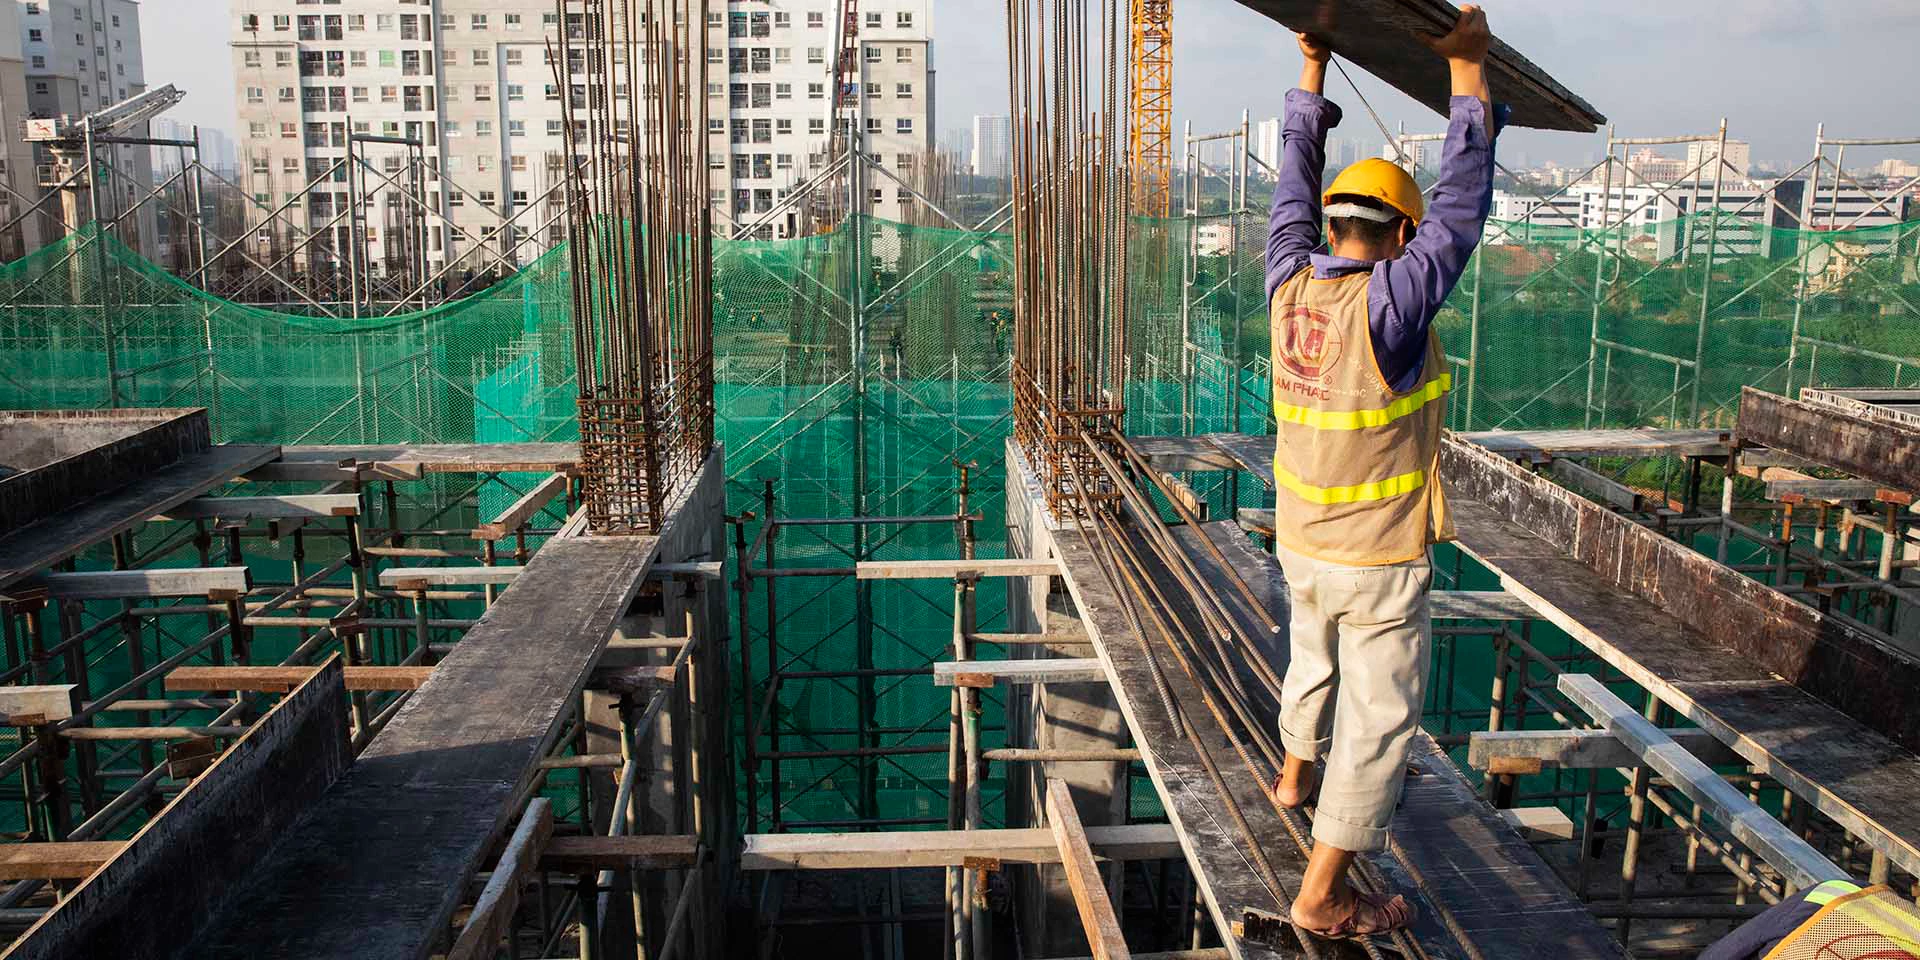 CNX construction workers carefully lay concrete forms in preparation to pour concrete on the upper floors of an apartment building in Hanoi, Vietnam on July 27, 2019. This construction project is an EDGE certified building, an affordable and sustainable housing development in Hanoi. Photo Â© Dominic Chavez/International Finance Corporation
